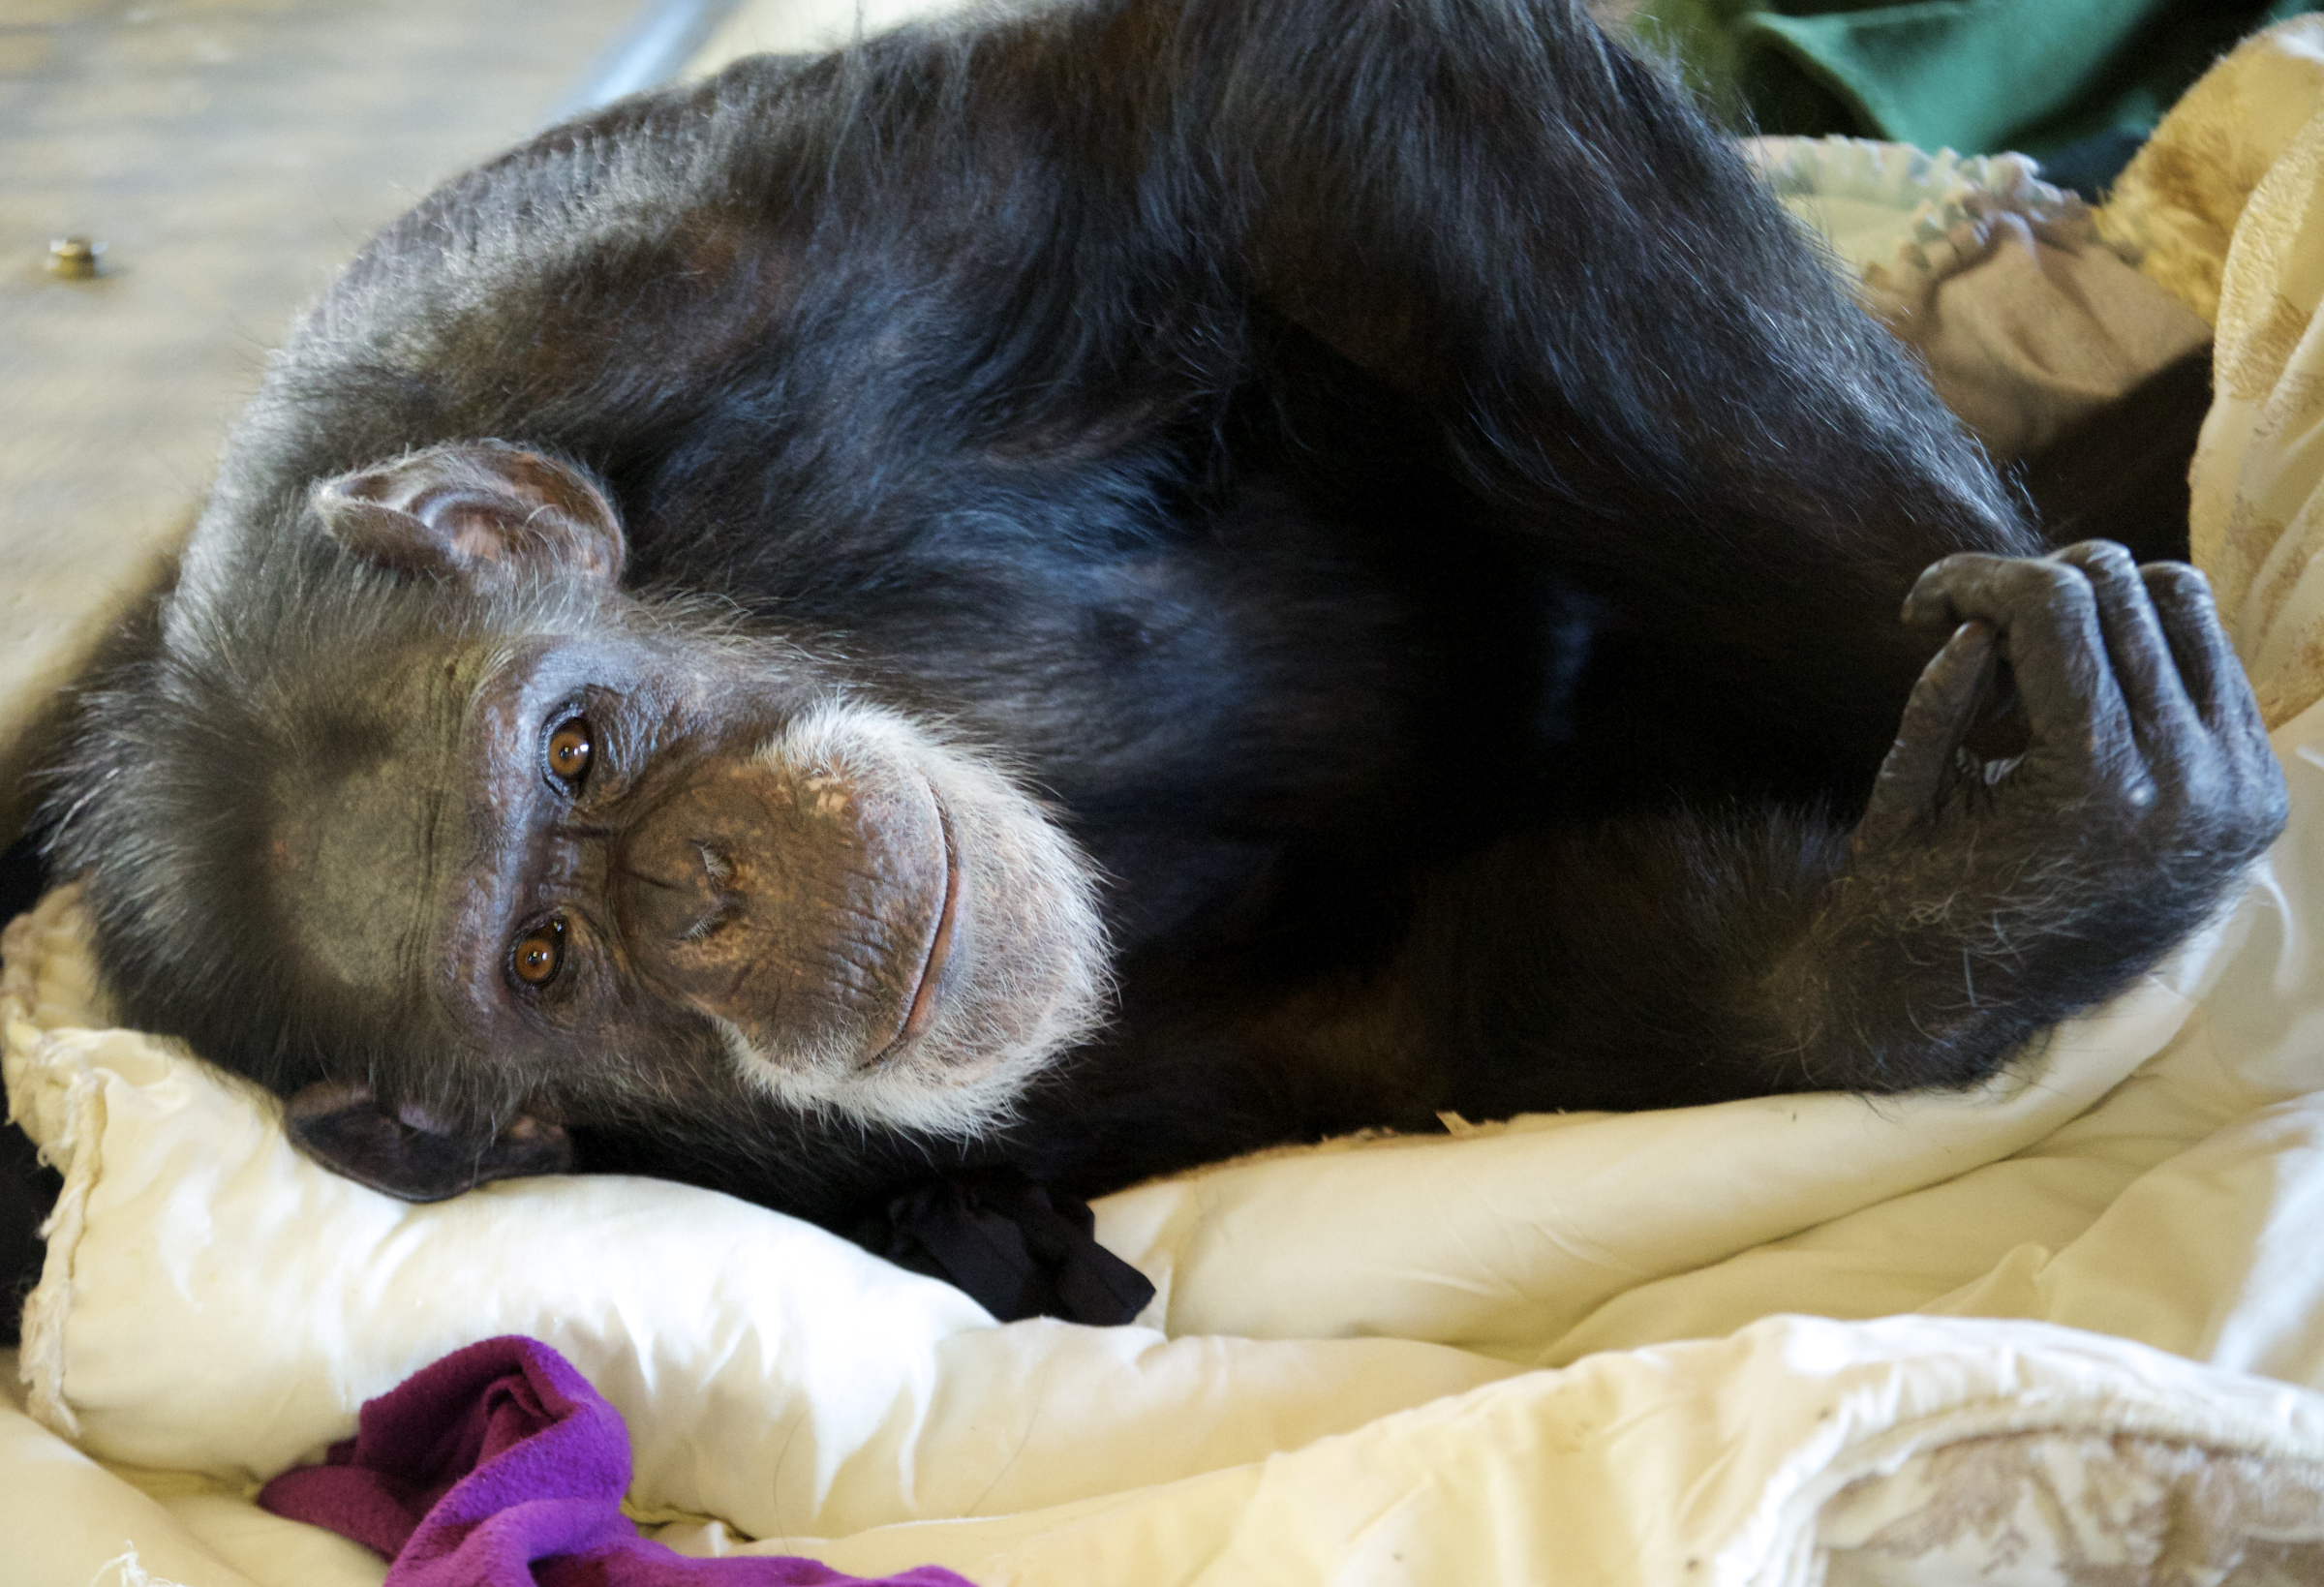 Tatu is a chimp at Fauna who knows sign language. Photo by NJ Wight of Fauna.